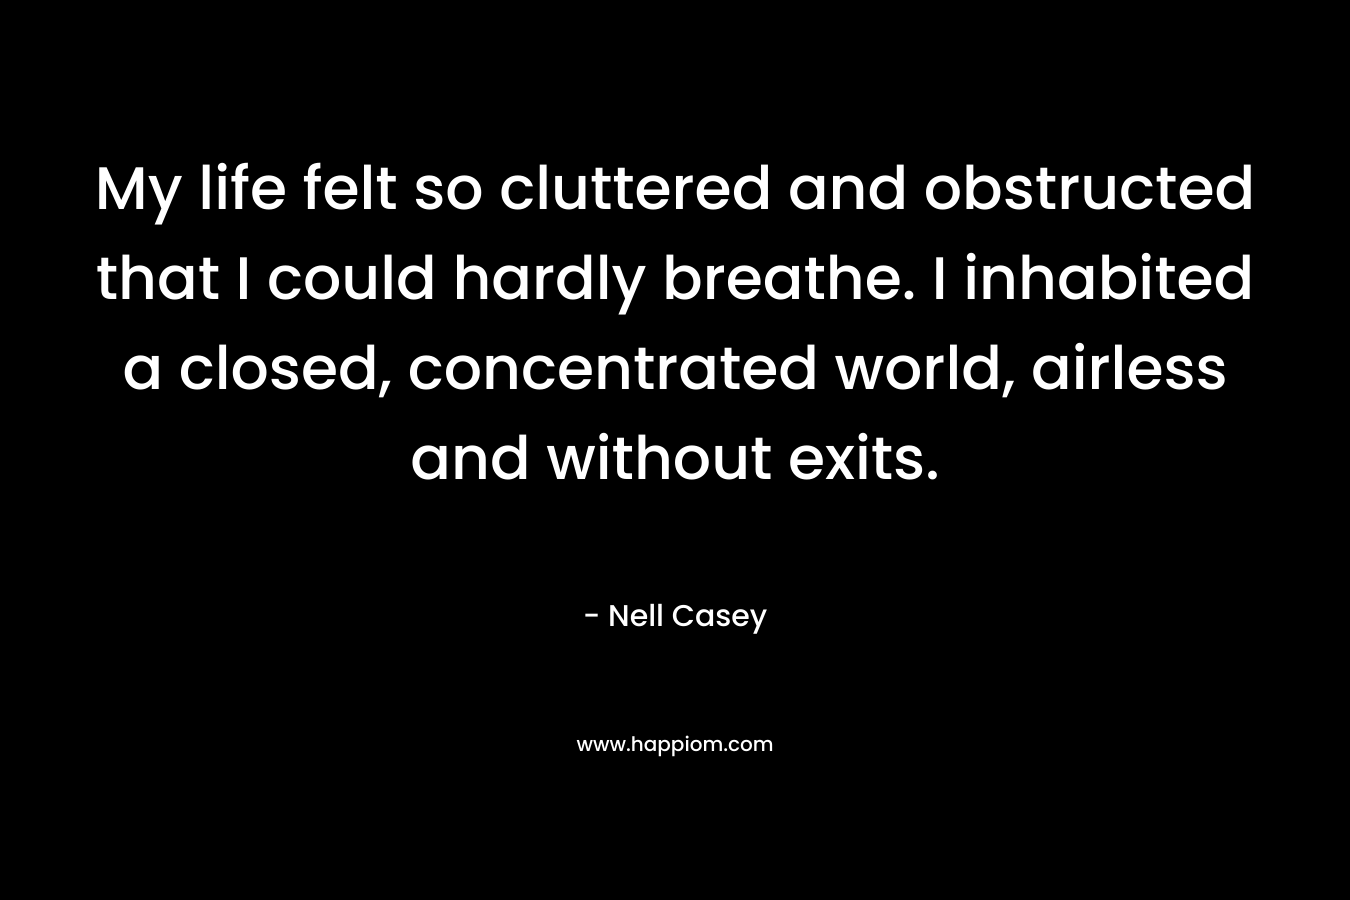 My life felt so cluttered and obstructed that I could hardly breathe. I inhabited a closed, concentrated world, airless and without exits. – Nell Casey